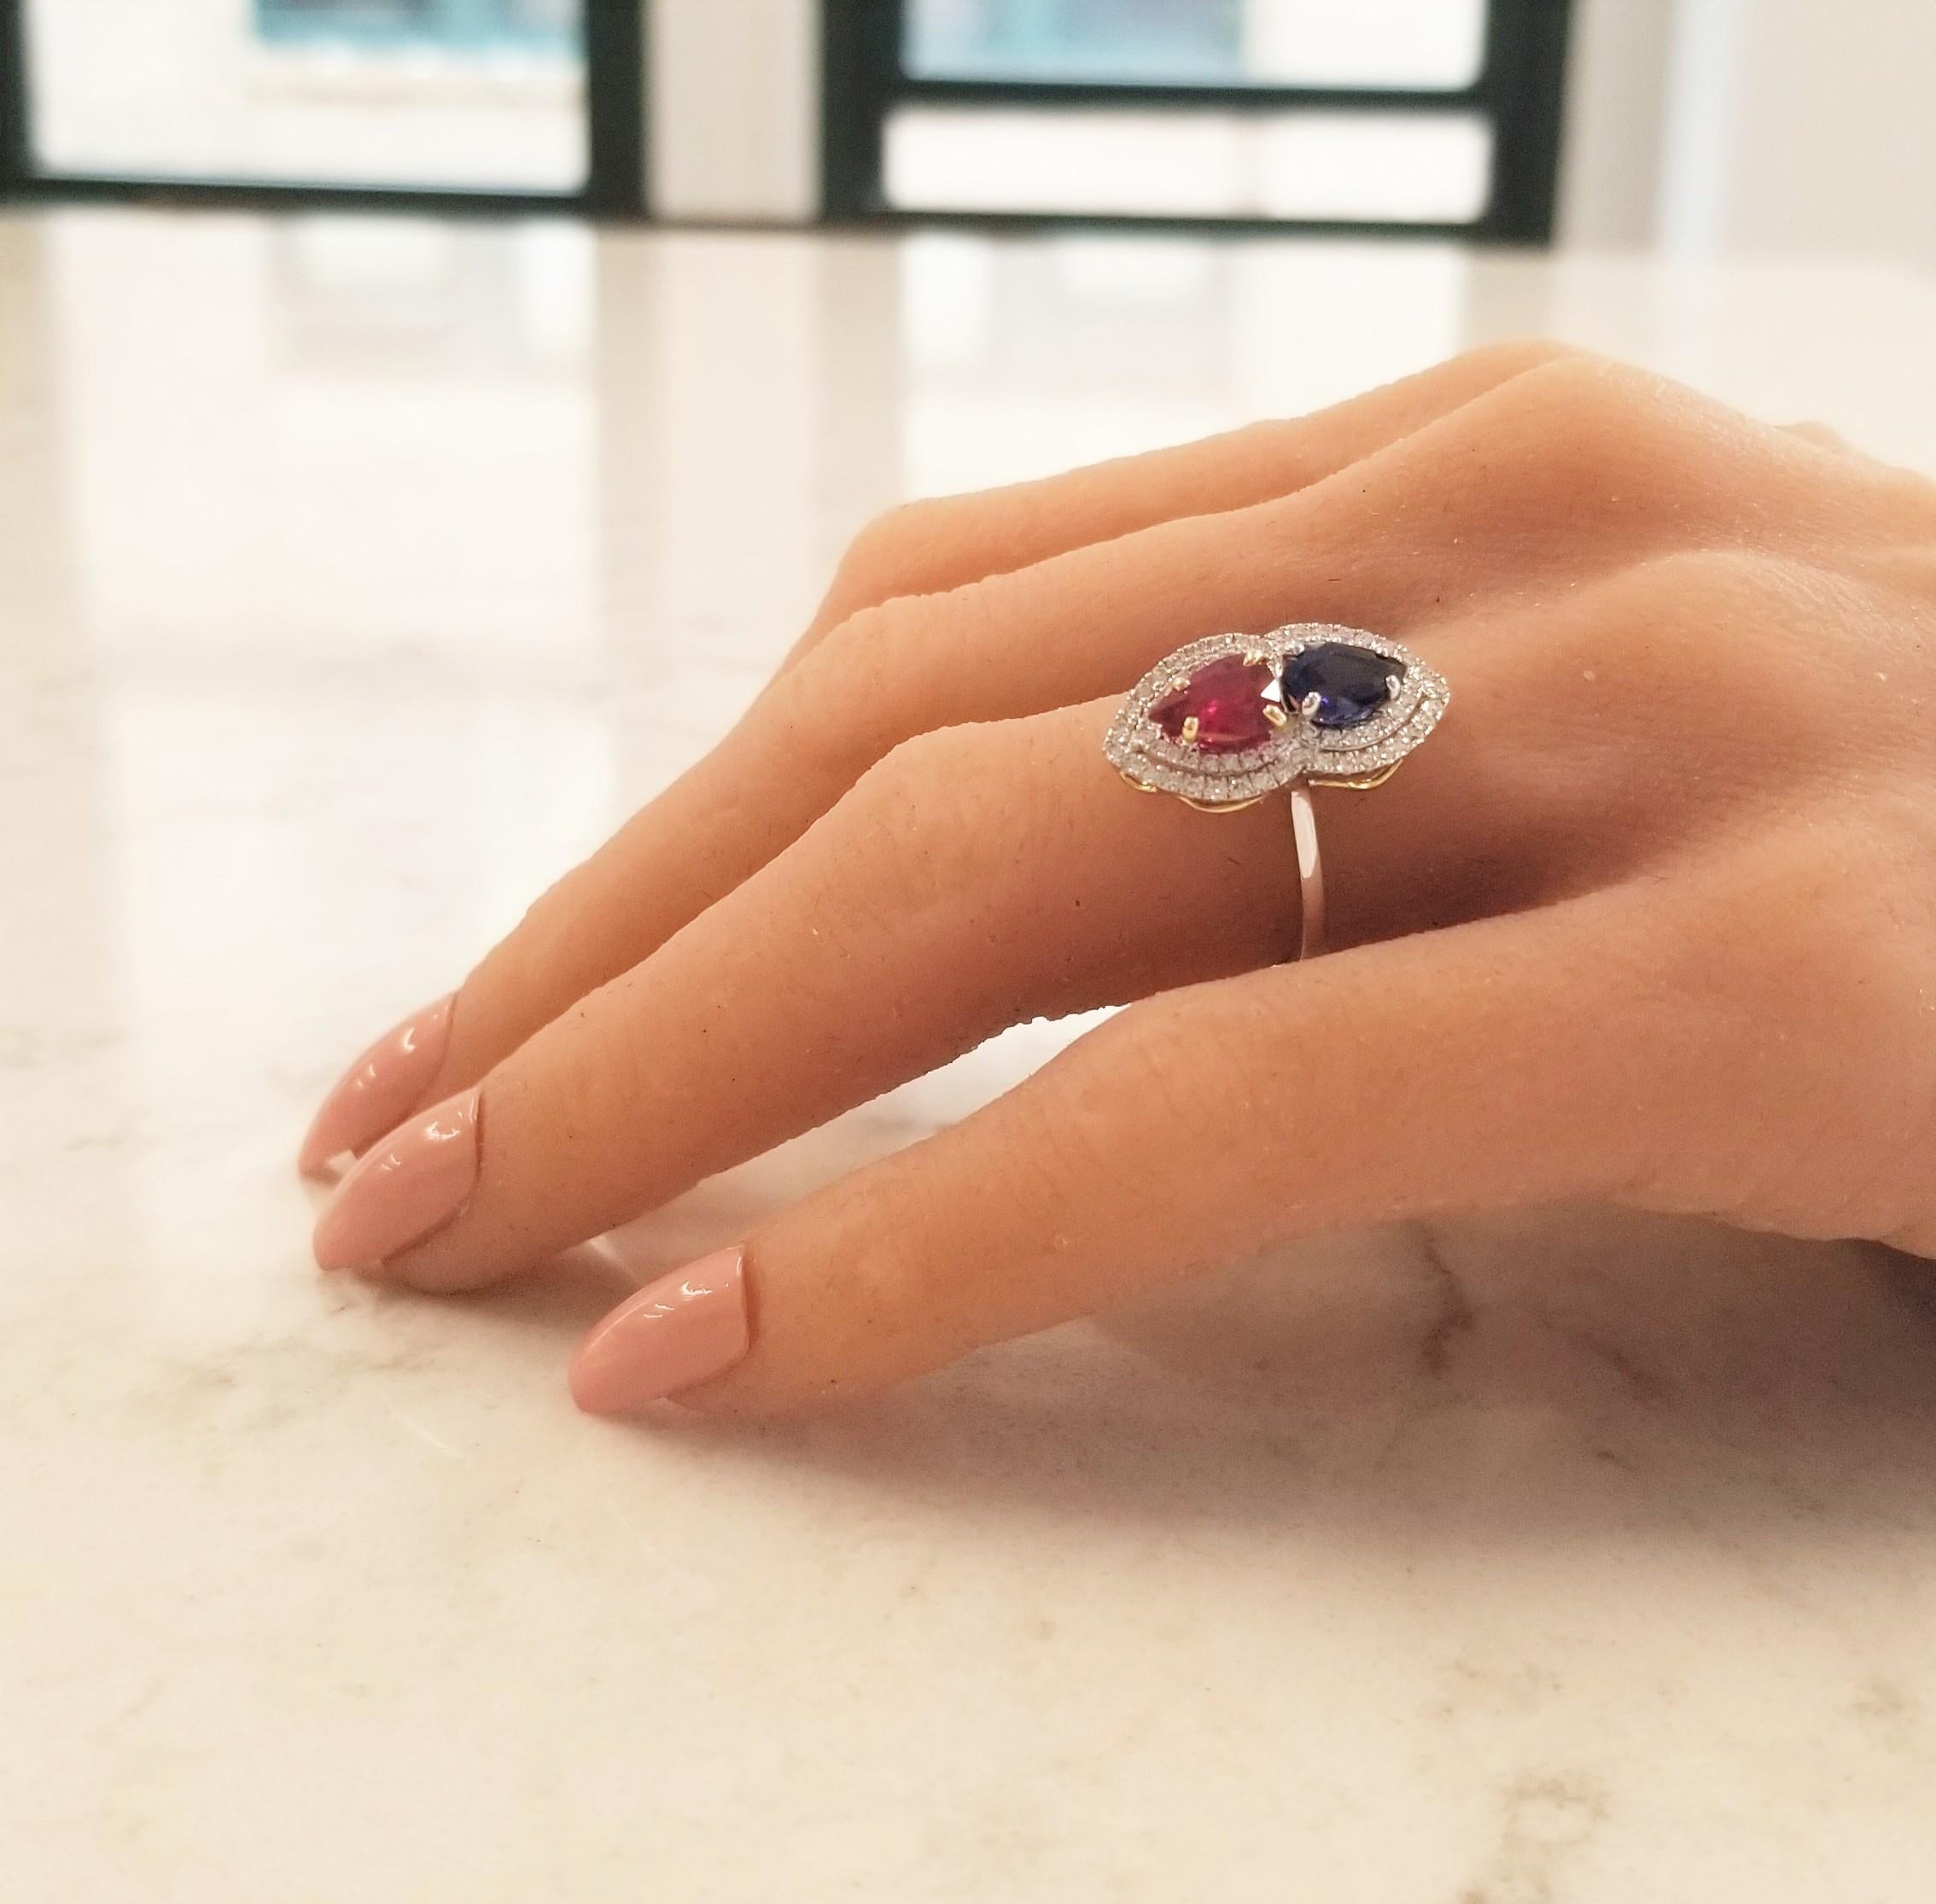 If you want an unparalleled design with top-end precious gems, consider this ring. An important unheated GIA certified 1.05 carat, pear-shaped, blood red ruby is from Mozambique. Its color is vibrant; its transparency and luster are superb. Sharing